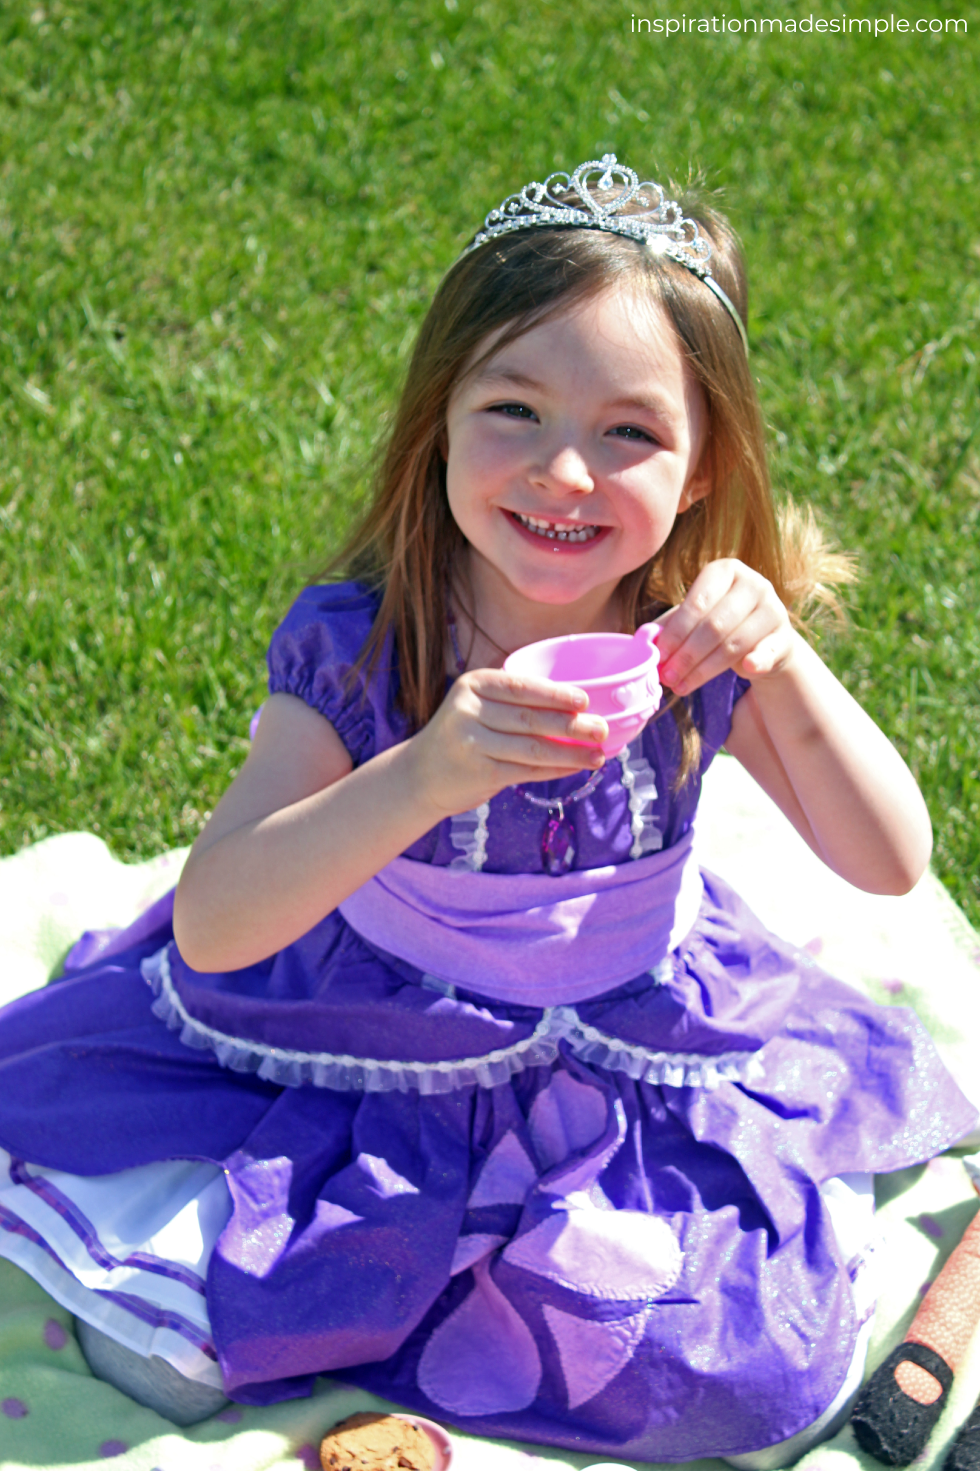 Sofia the First Inspired Dress